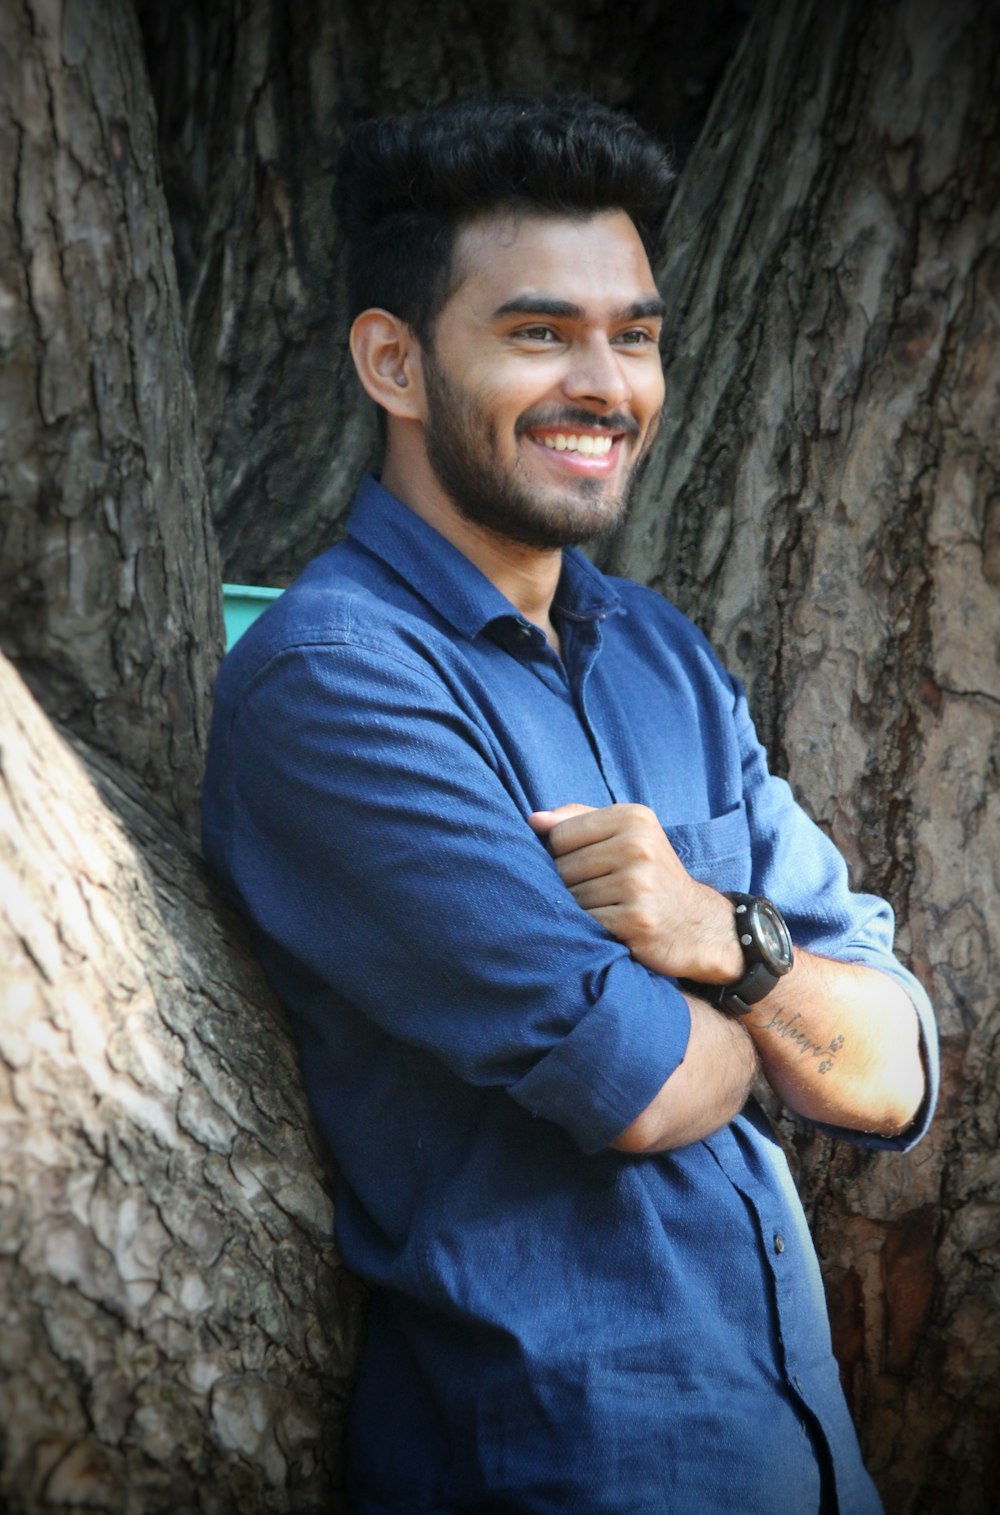 man in blue dress shirt standing and leaning on tree and smiling